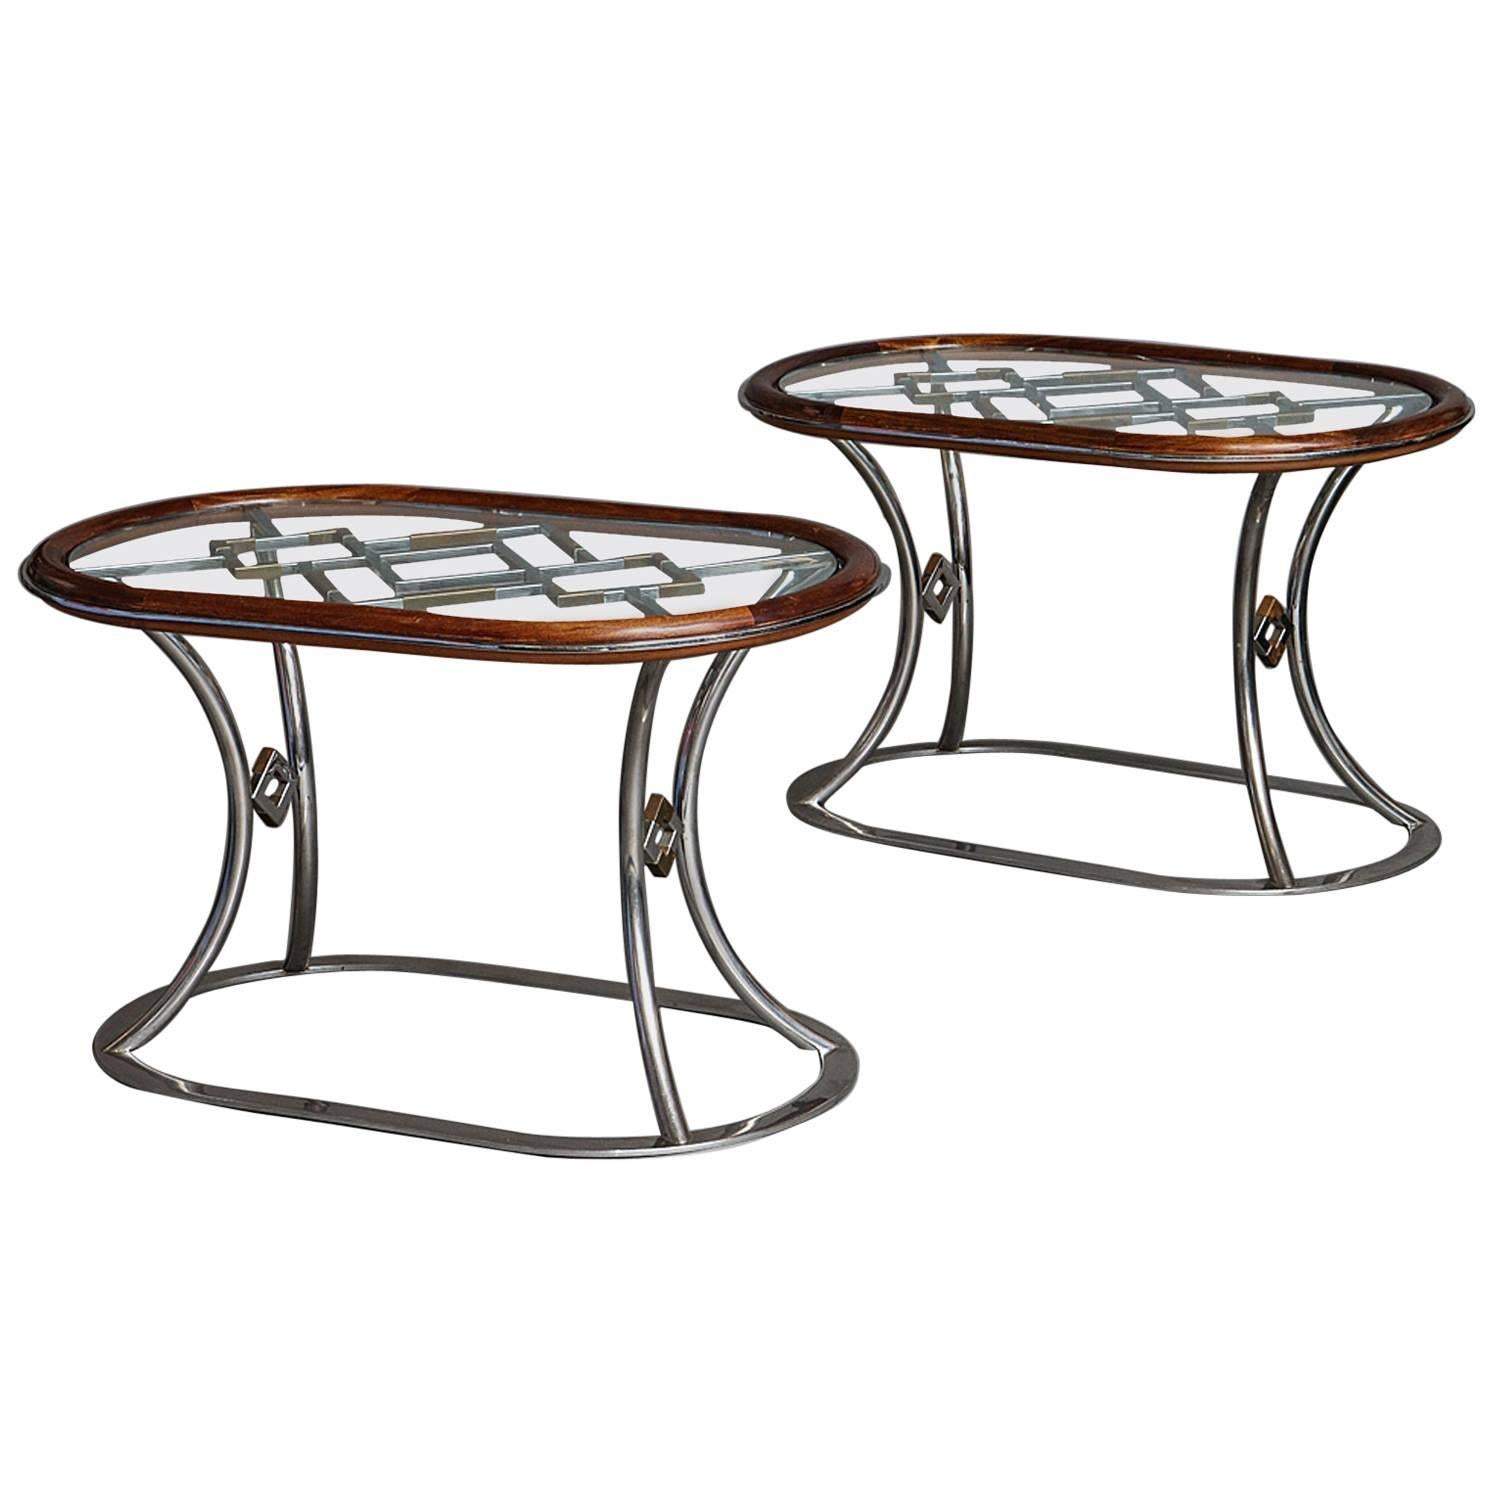 Pair of Side Tables by Alain Delon for Jansen